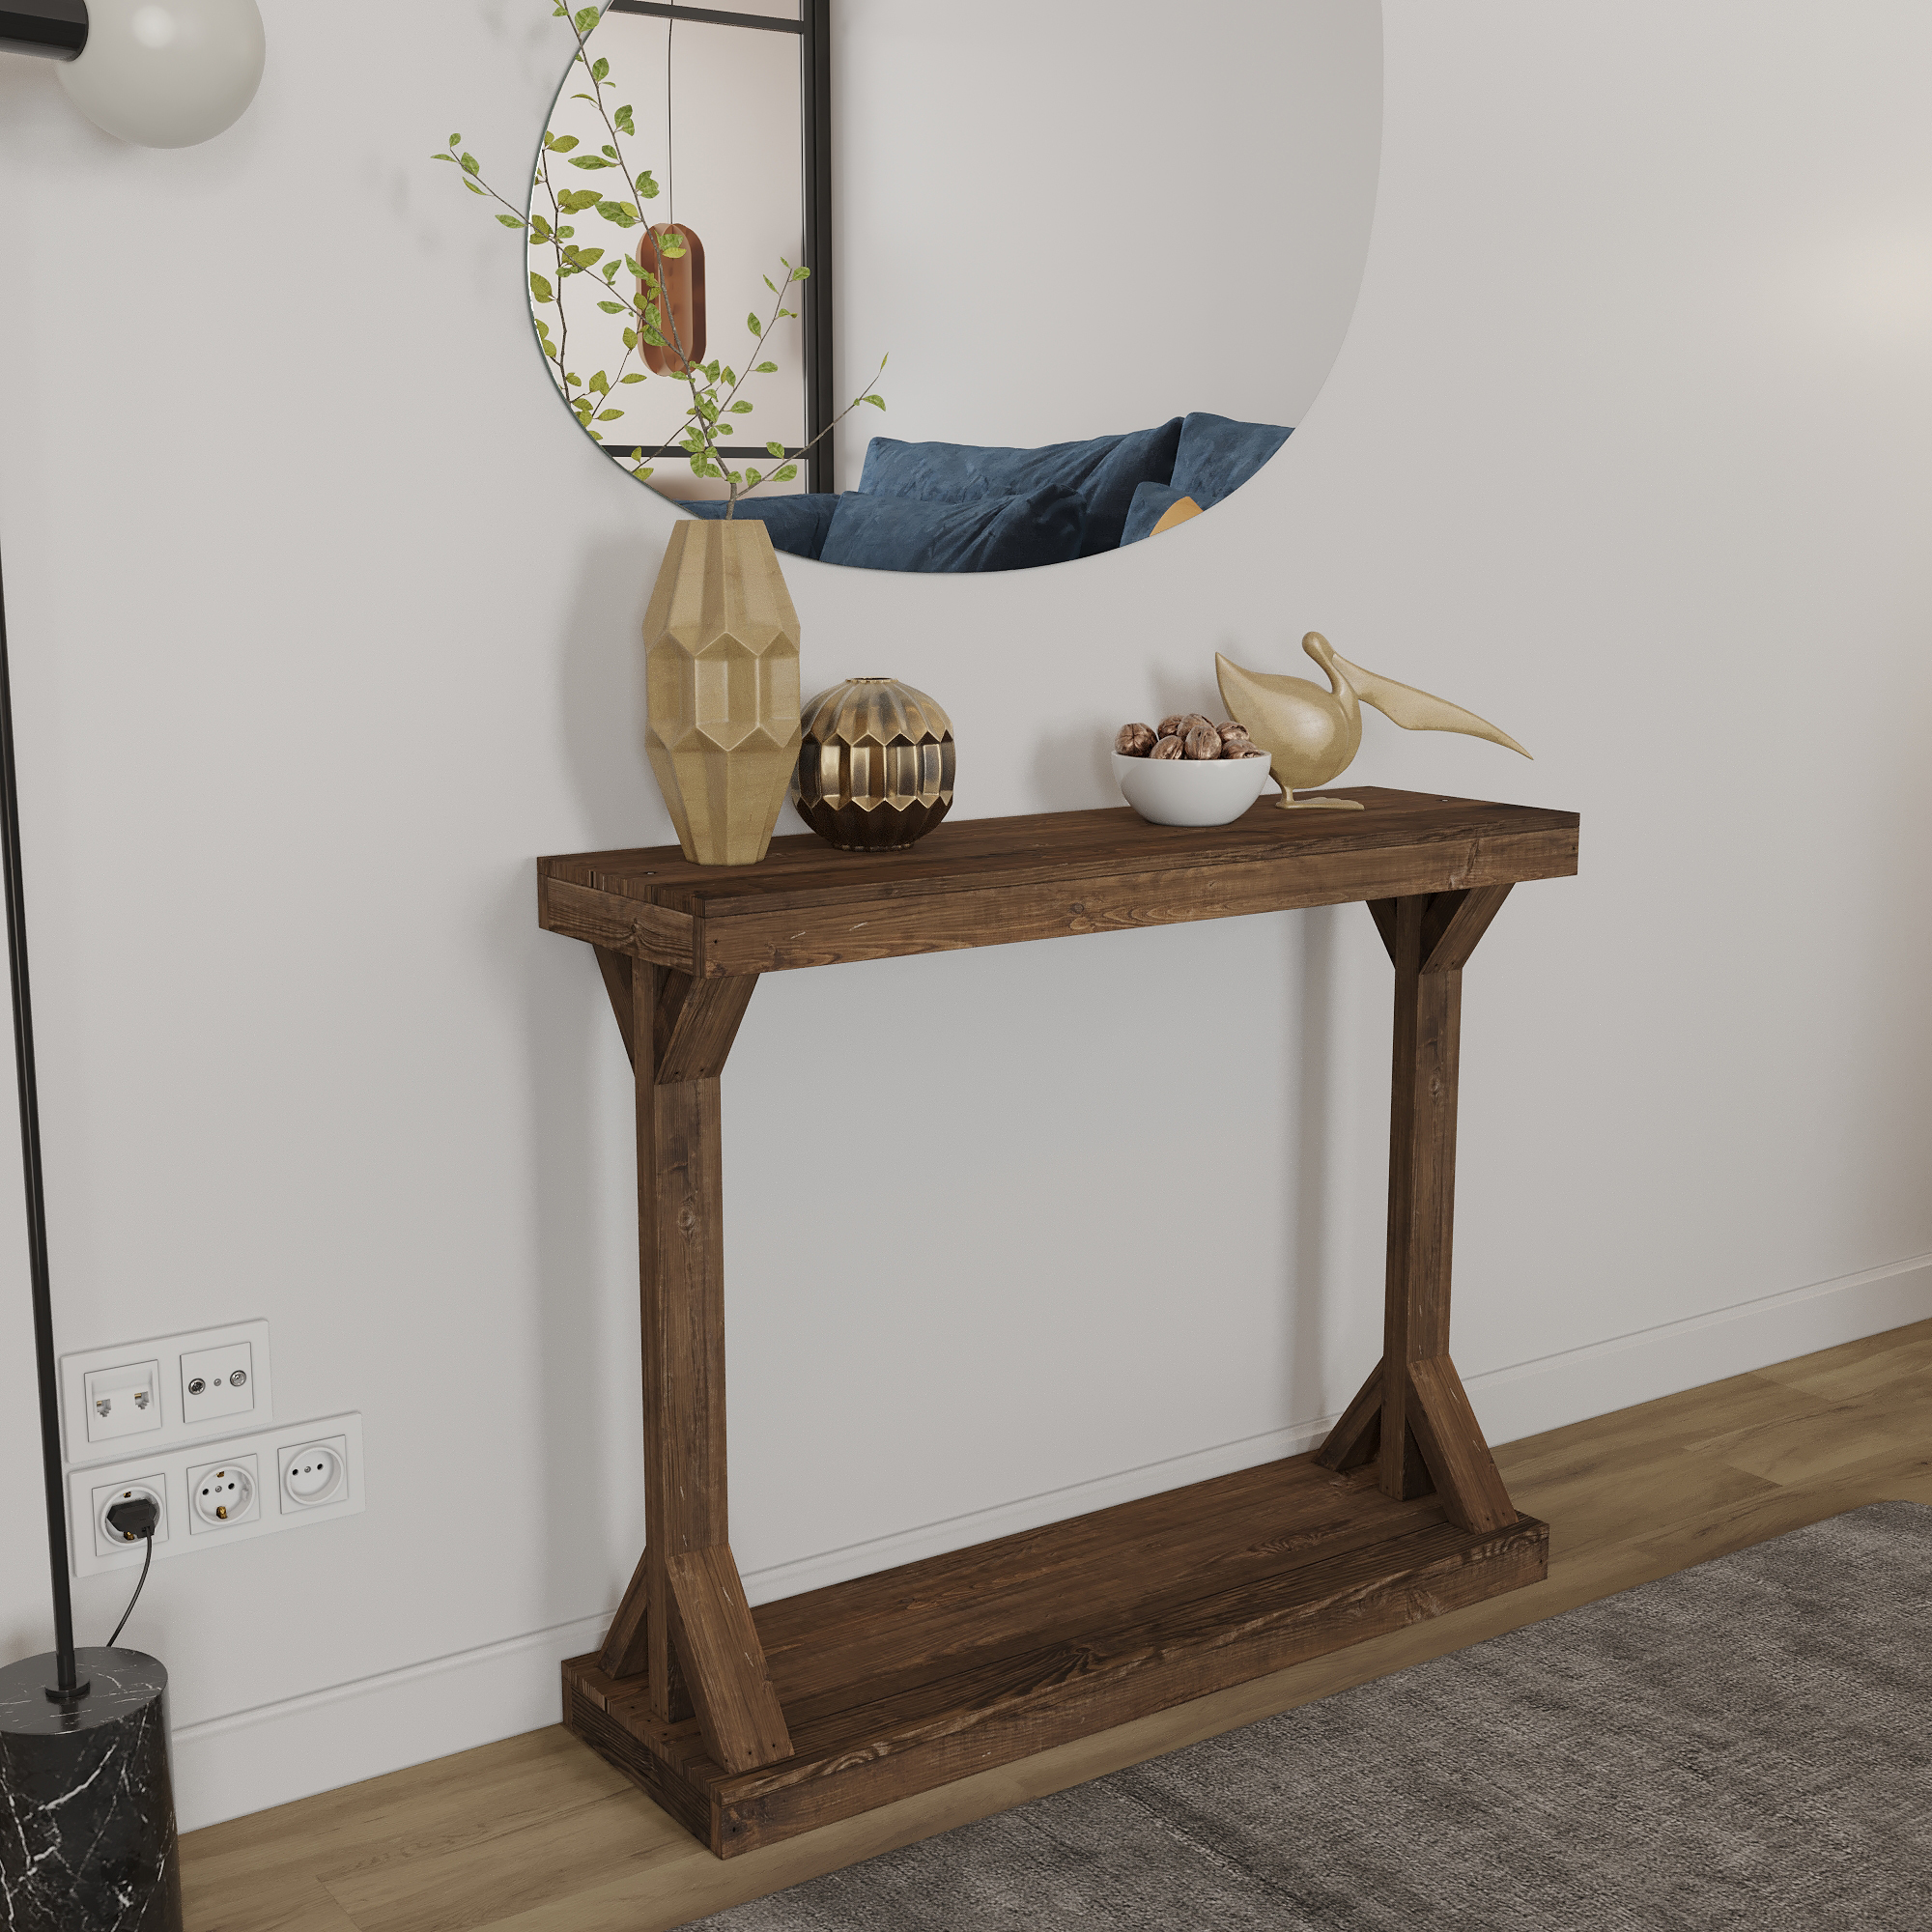 Woven Paths Small Rustic Barb Pedestal Entryway Console Table, Brown - image 3 of 4